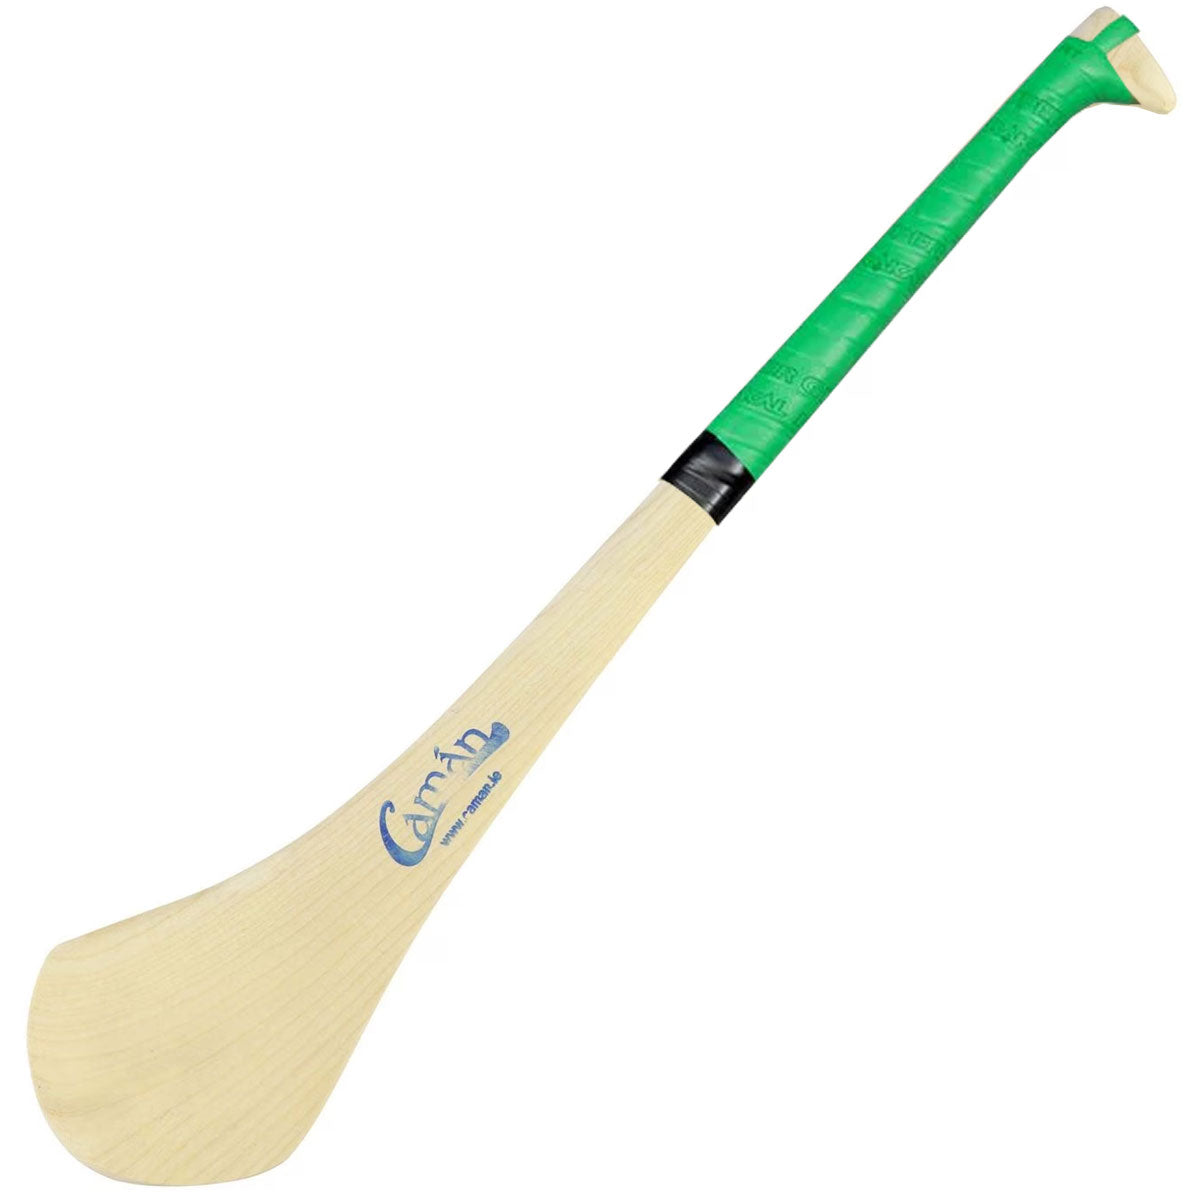 Caman Hurling Stick size 24 (Inches)